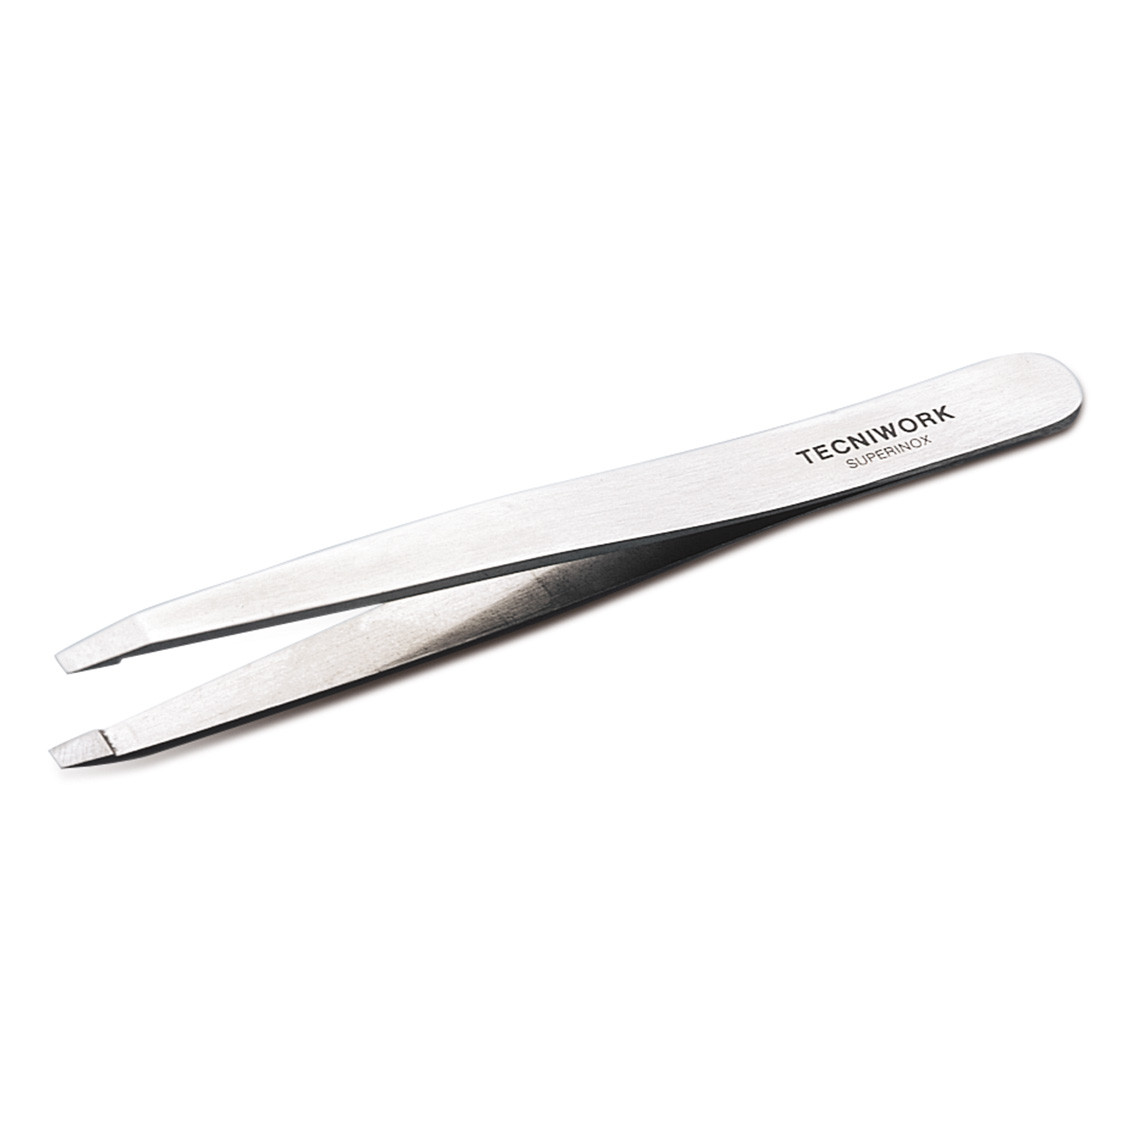 Professional Stainless Steel Eyebrow Tweezers with Straight Tip